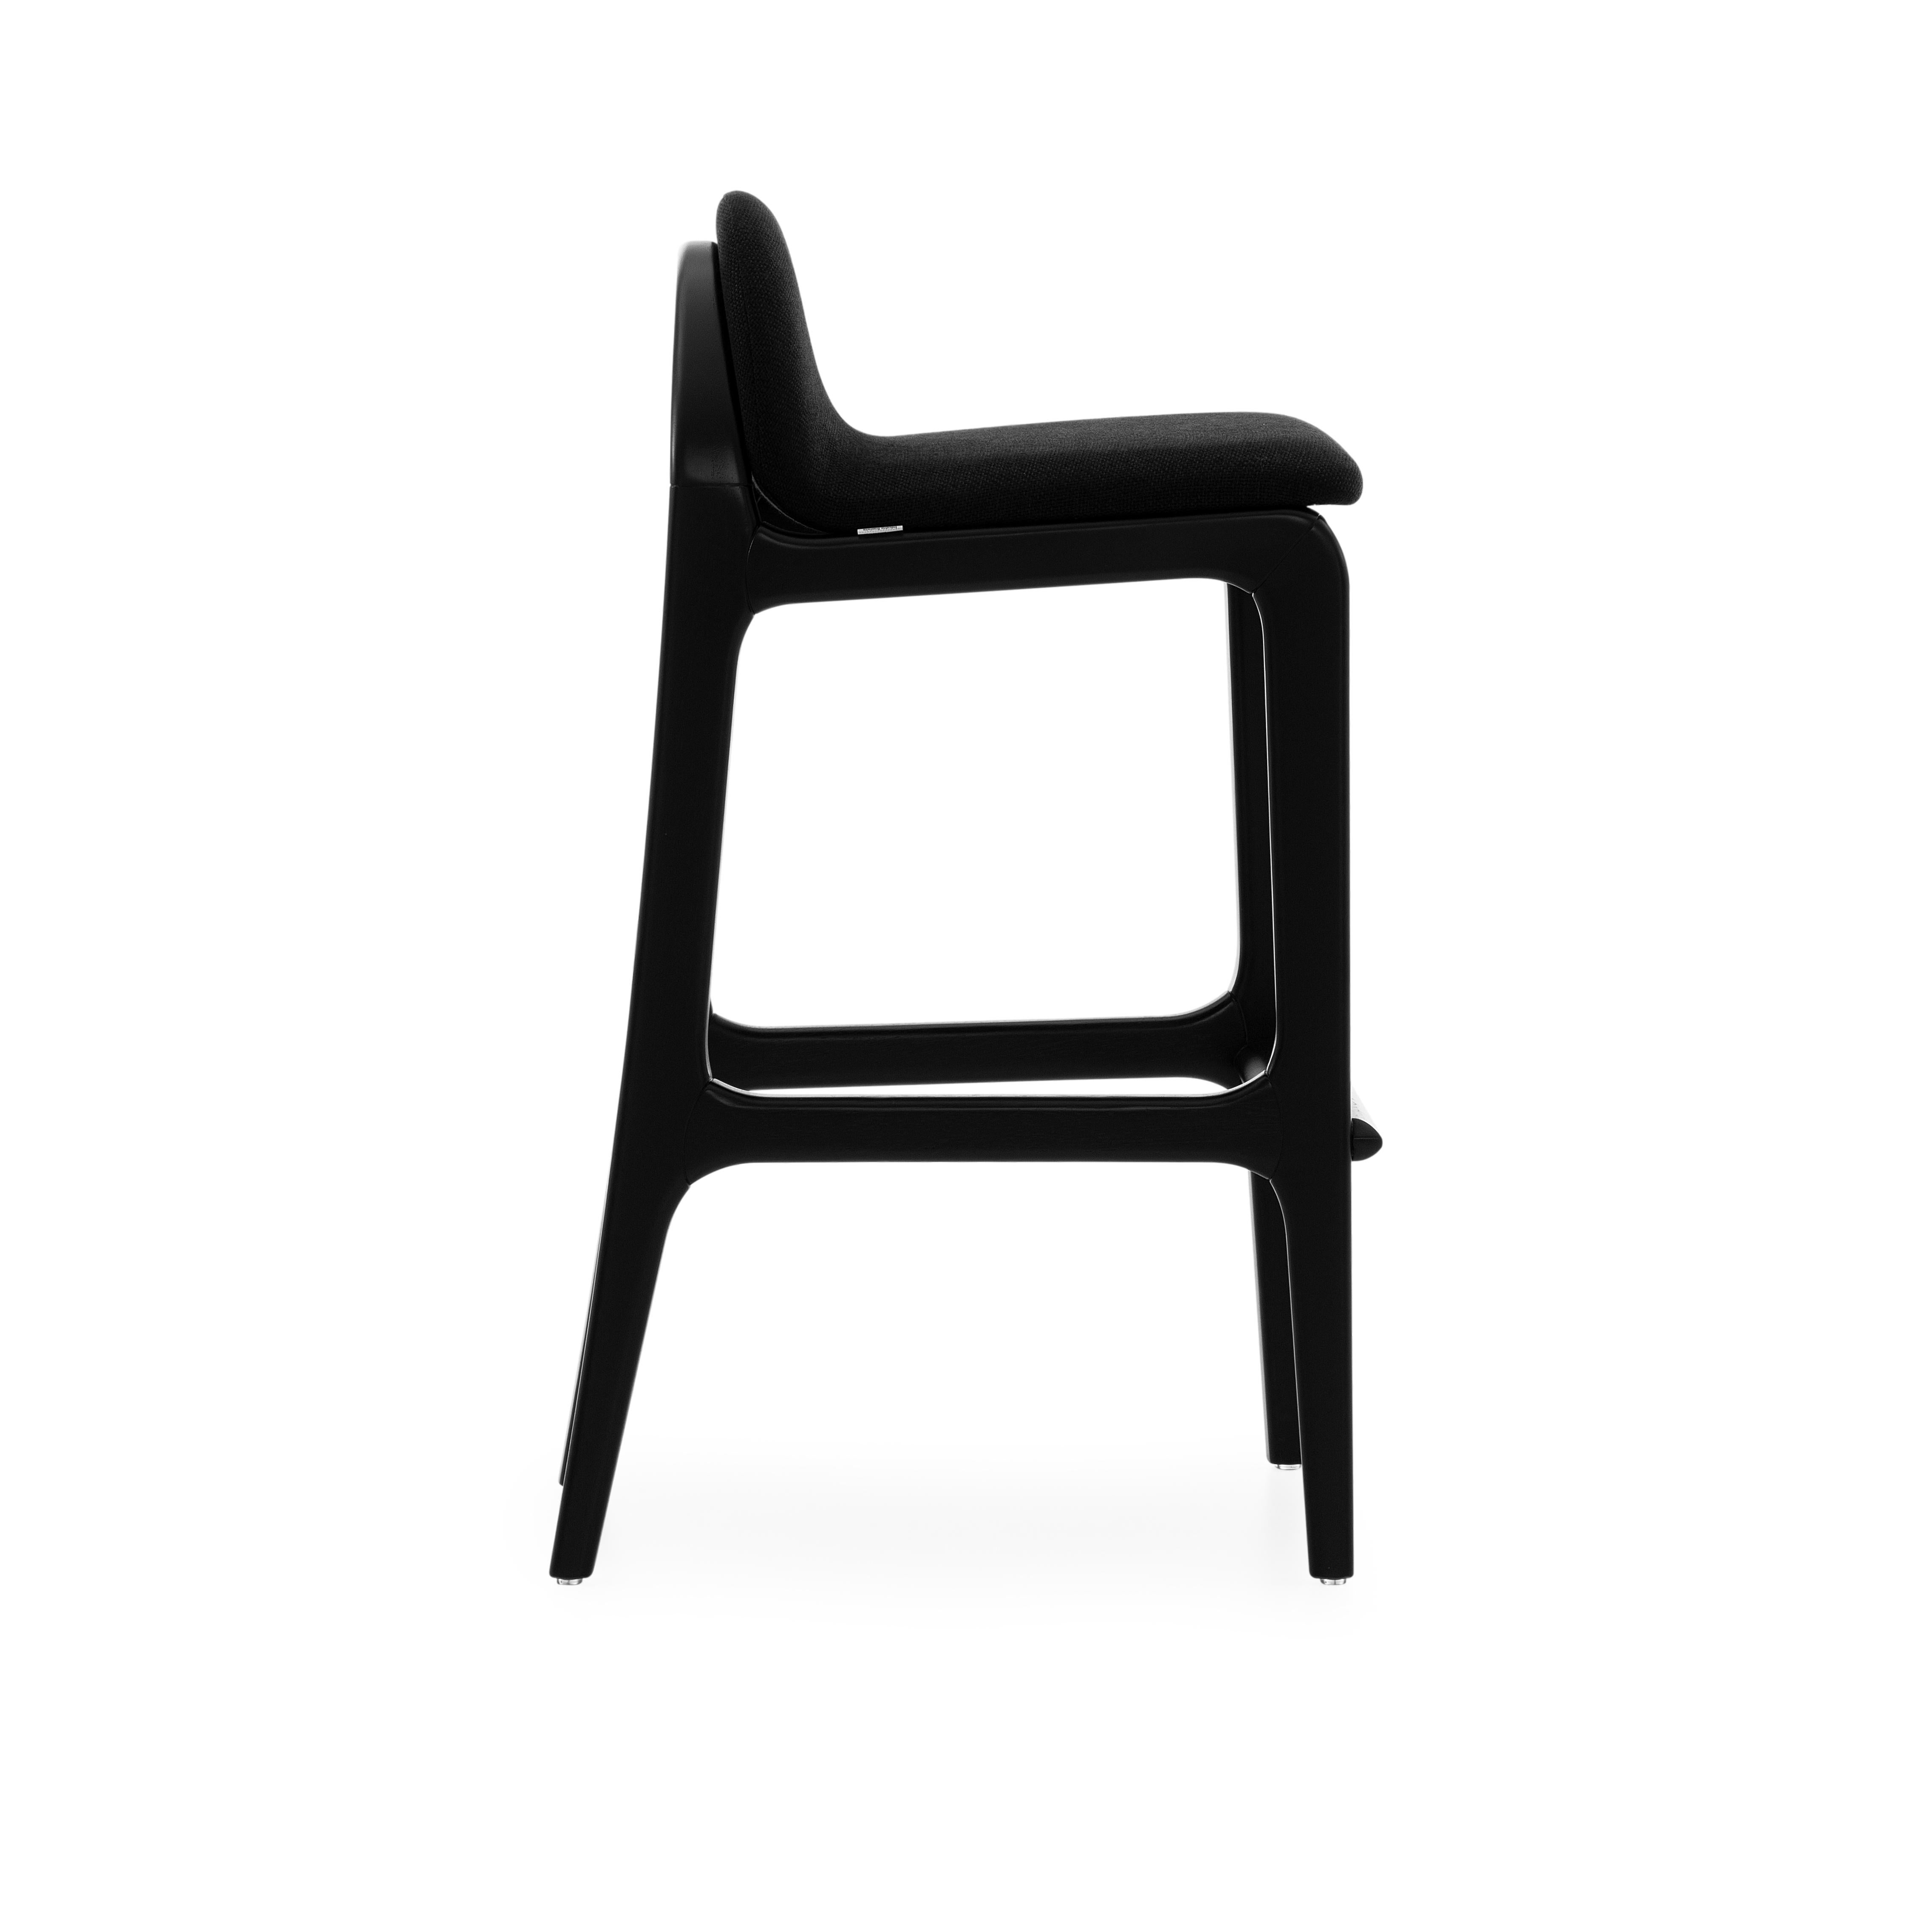 This beautiful Ura bar stool in a black wood base and an upholstered black fabric seat made in Brazil by our team of architects and designers from Uultis Design studio was fabricated with environmentally sustainable materials. It is designed with a